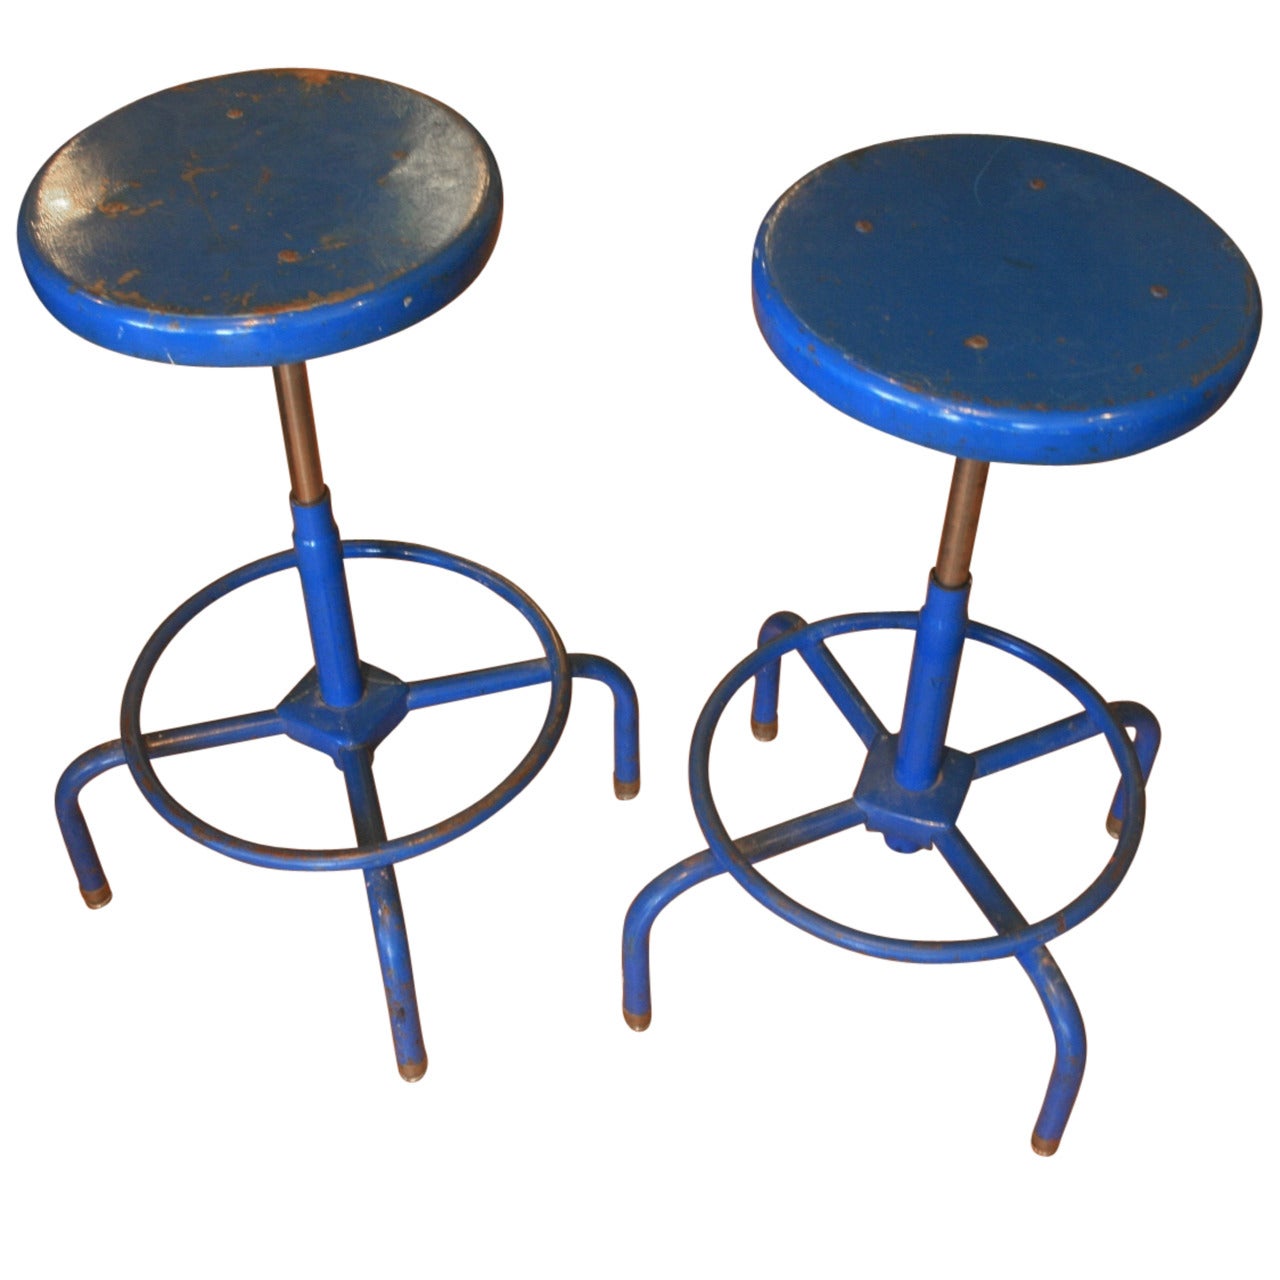 Great Pair of Blue Industrial Stools